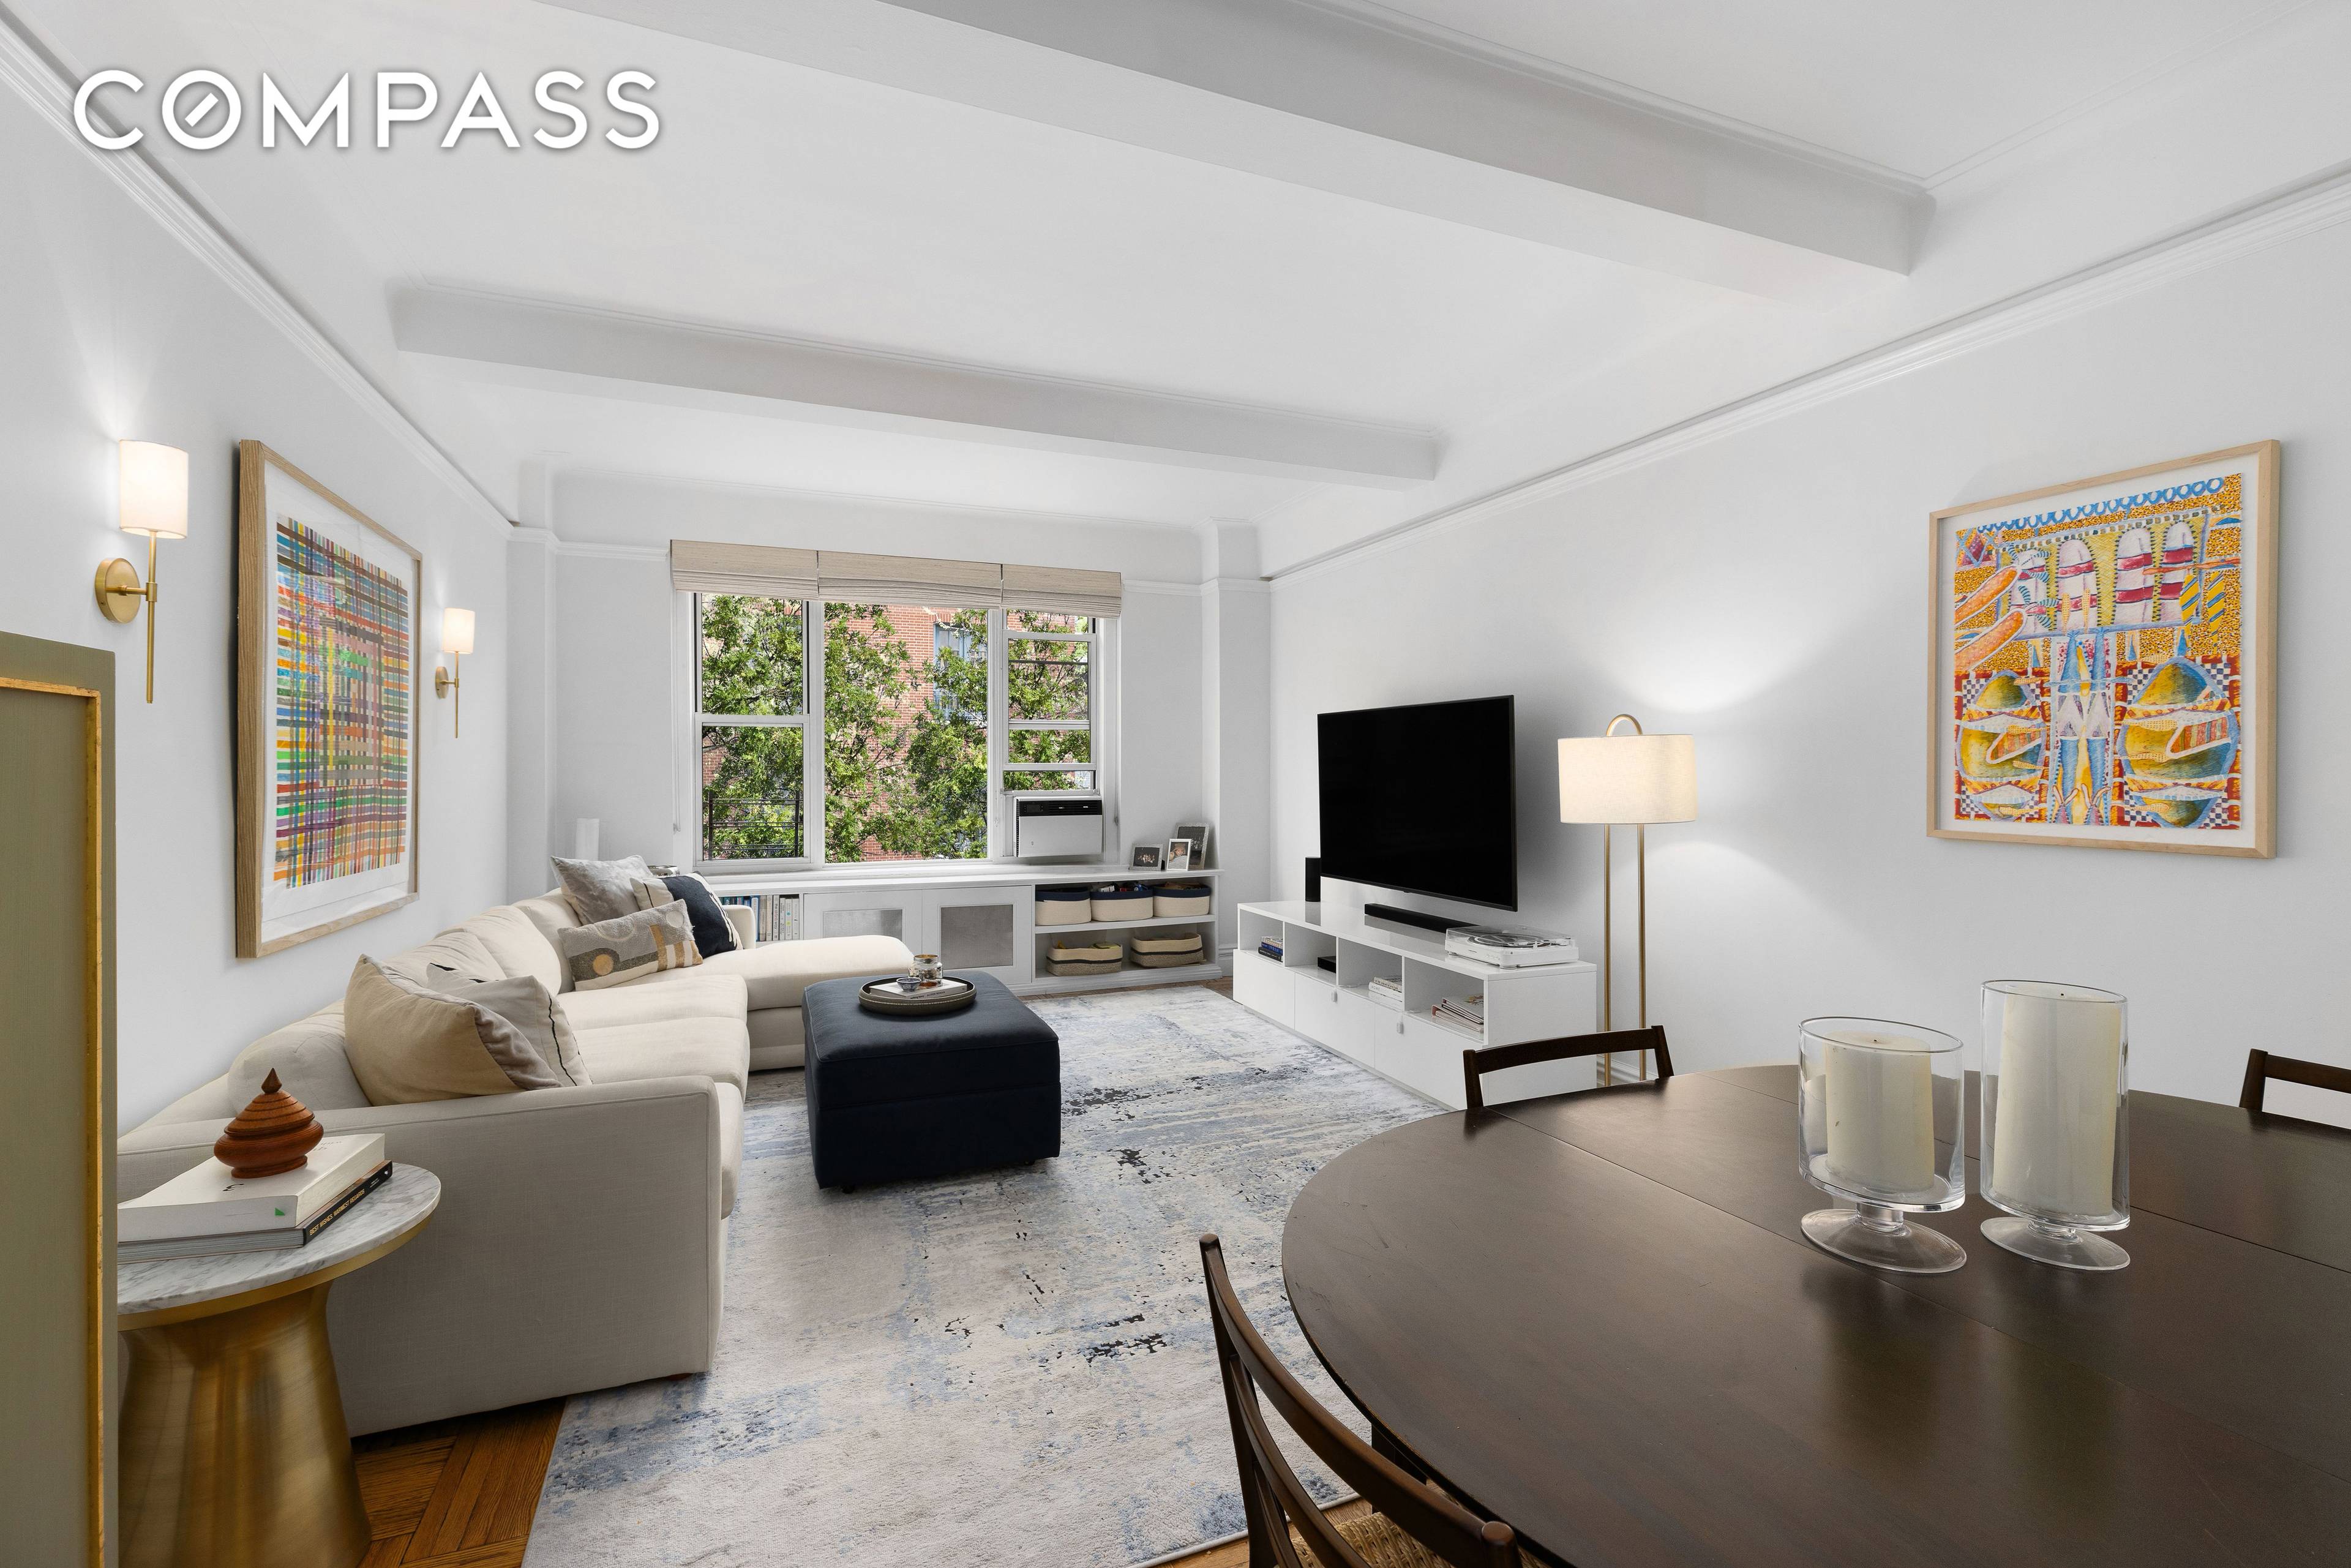 This light filled two bedroom gem in the heart of Carnegie Hill is characterized by fine prewar details and charming treetop views.